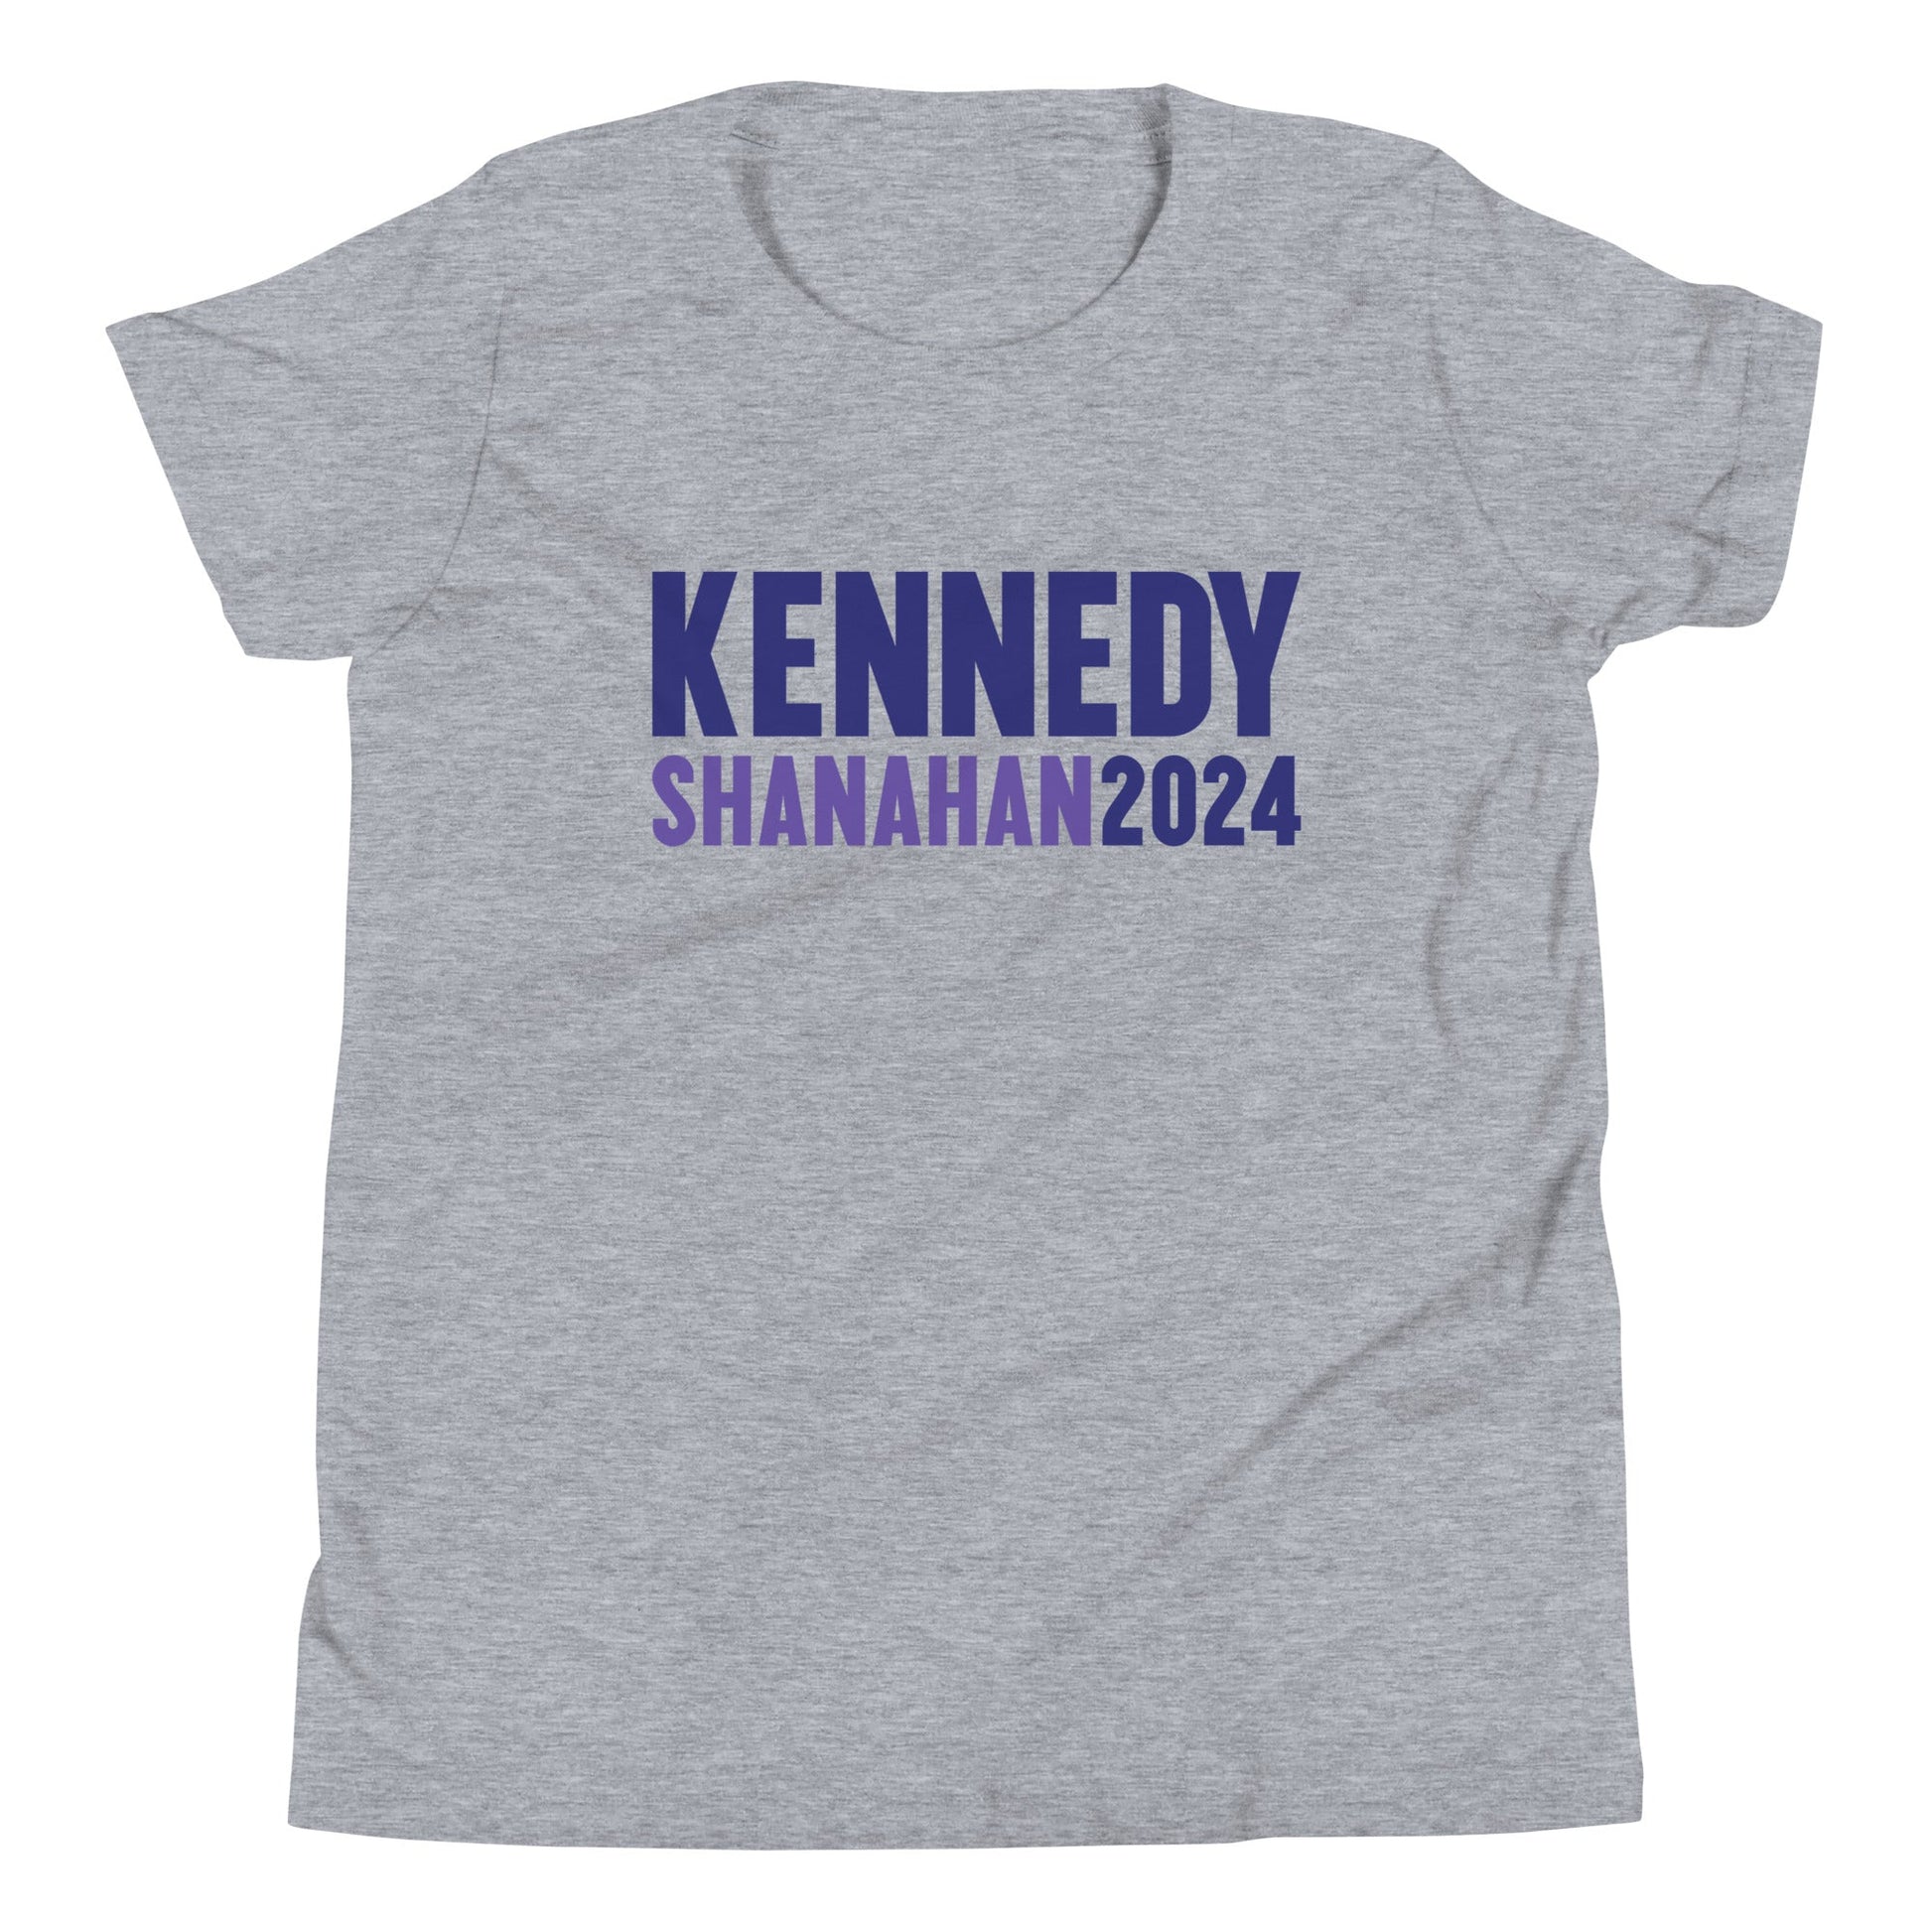 Kennedy X Shanahan II Youth Tee - TEAM KENNEDY. All rights reserved